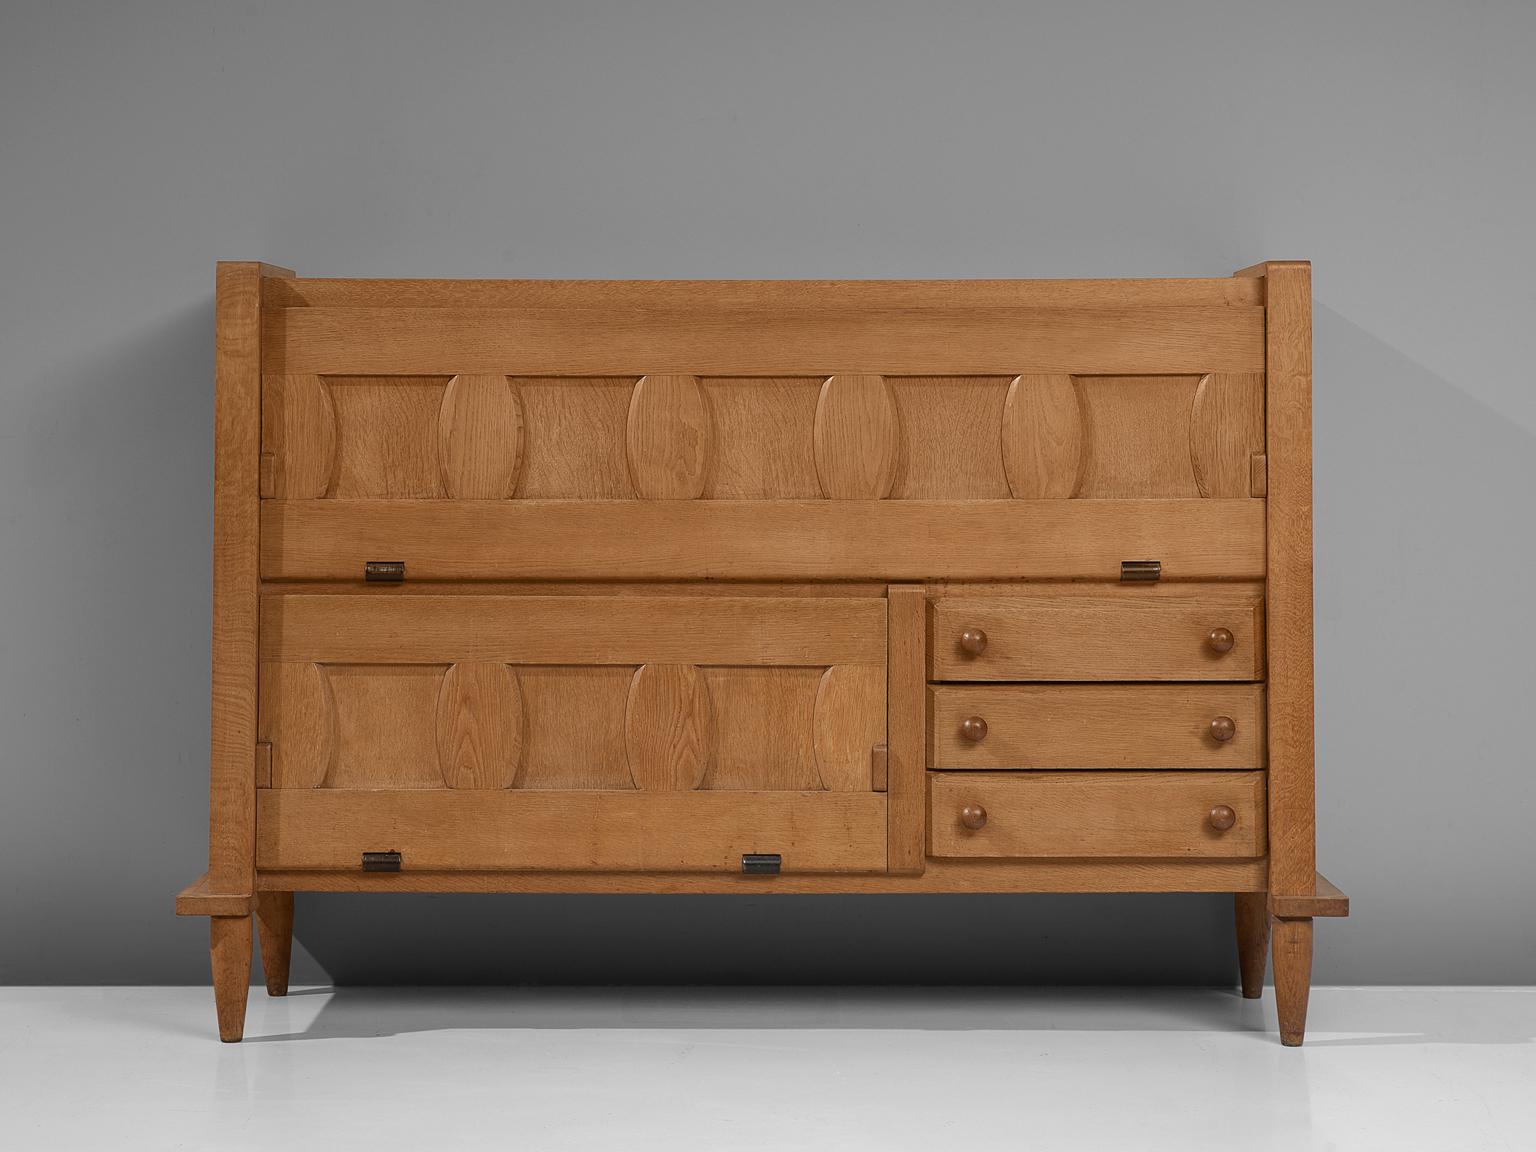 Guillerme et Chambron for Votre Maison, sideboard, solid oak, France, 1960s

This characteristic sideboard in solid oak is designed by the French designer duo Jacques Chambron (1914-2001) and Robert Guillerme (1913-1990). It holds one large